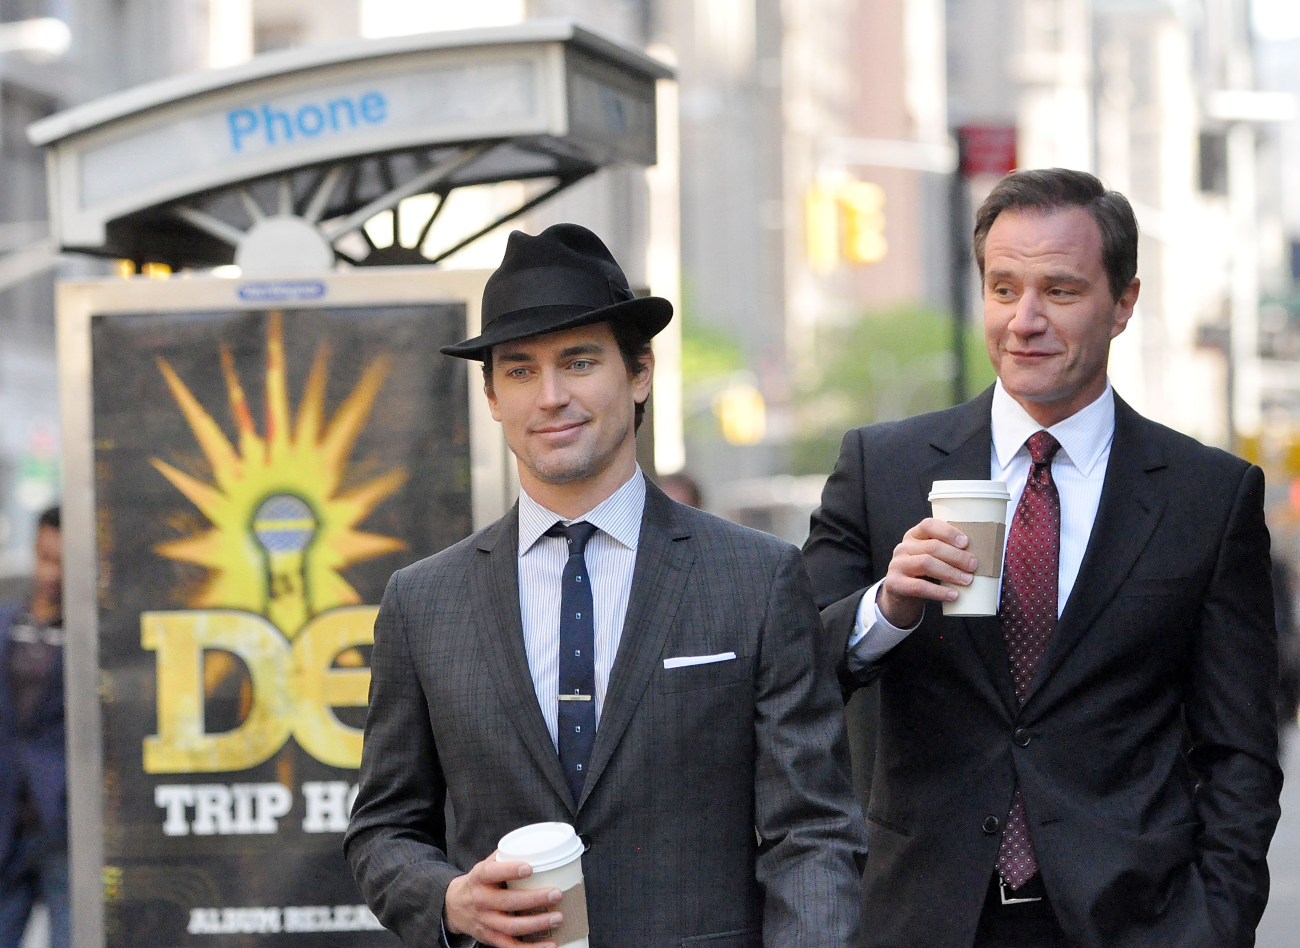 Matt Bomer and Tim DeKay filming on location for ‘White Collar,’ May, 2013 in New York City